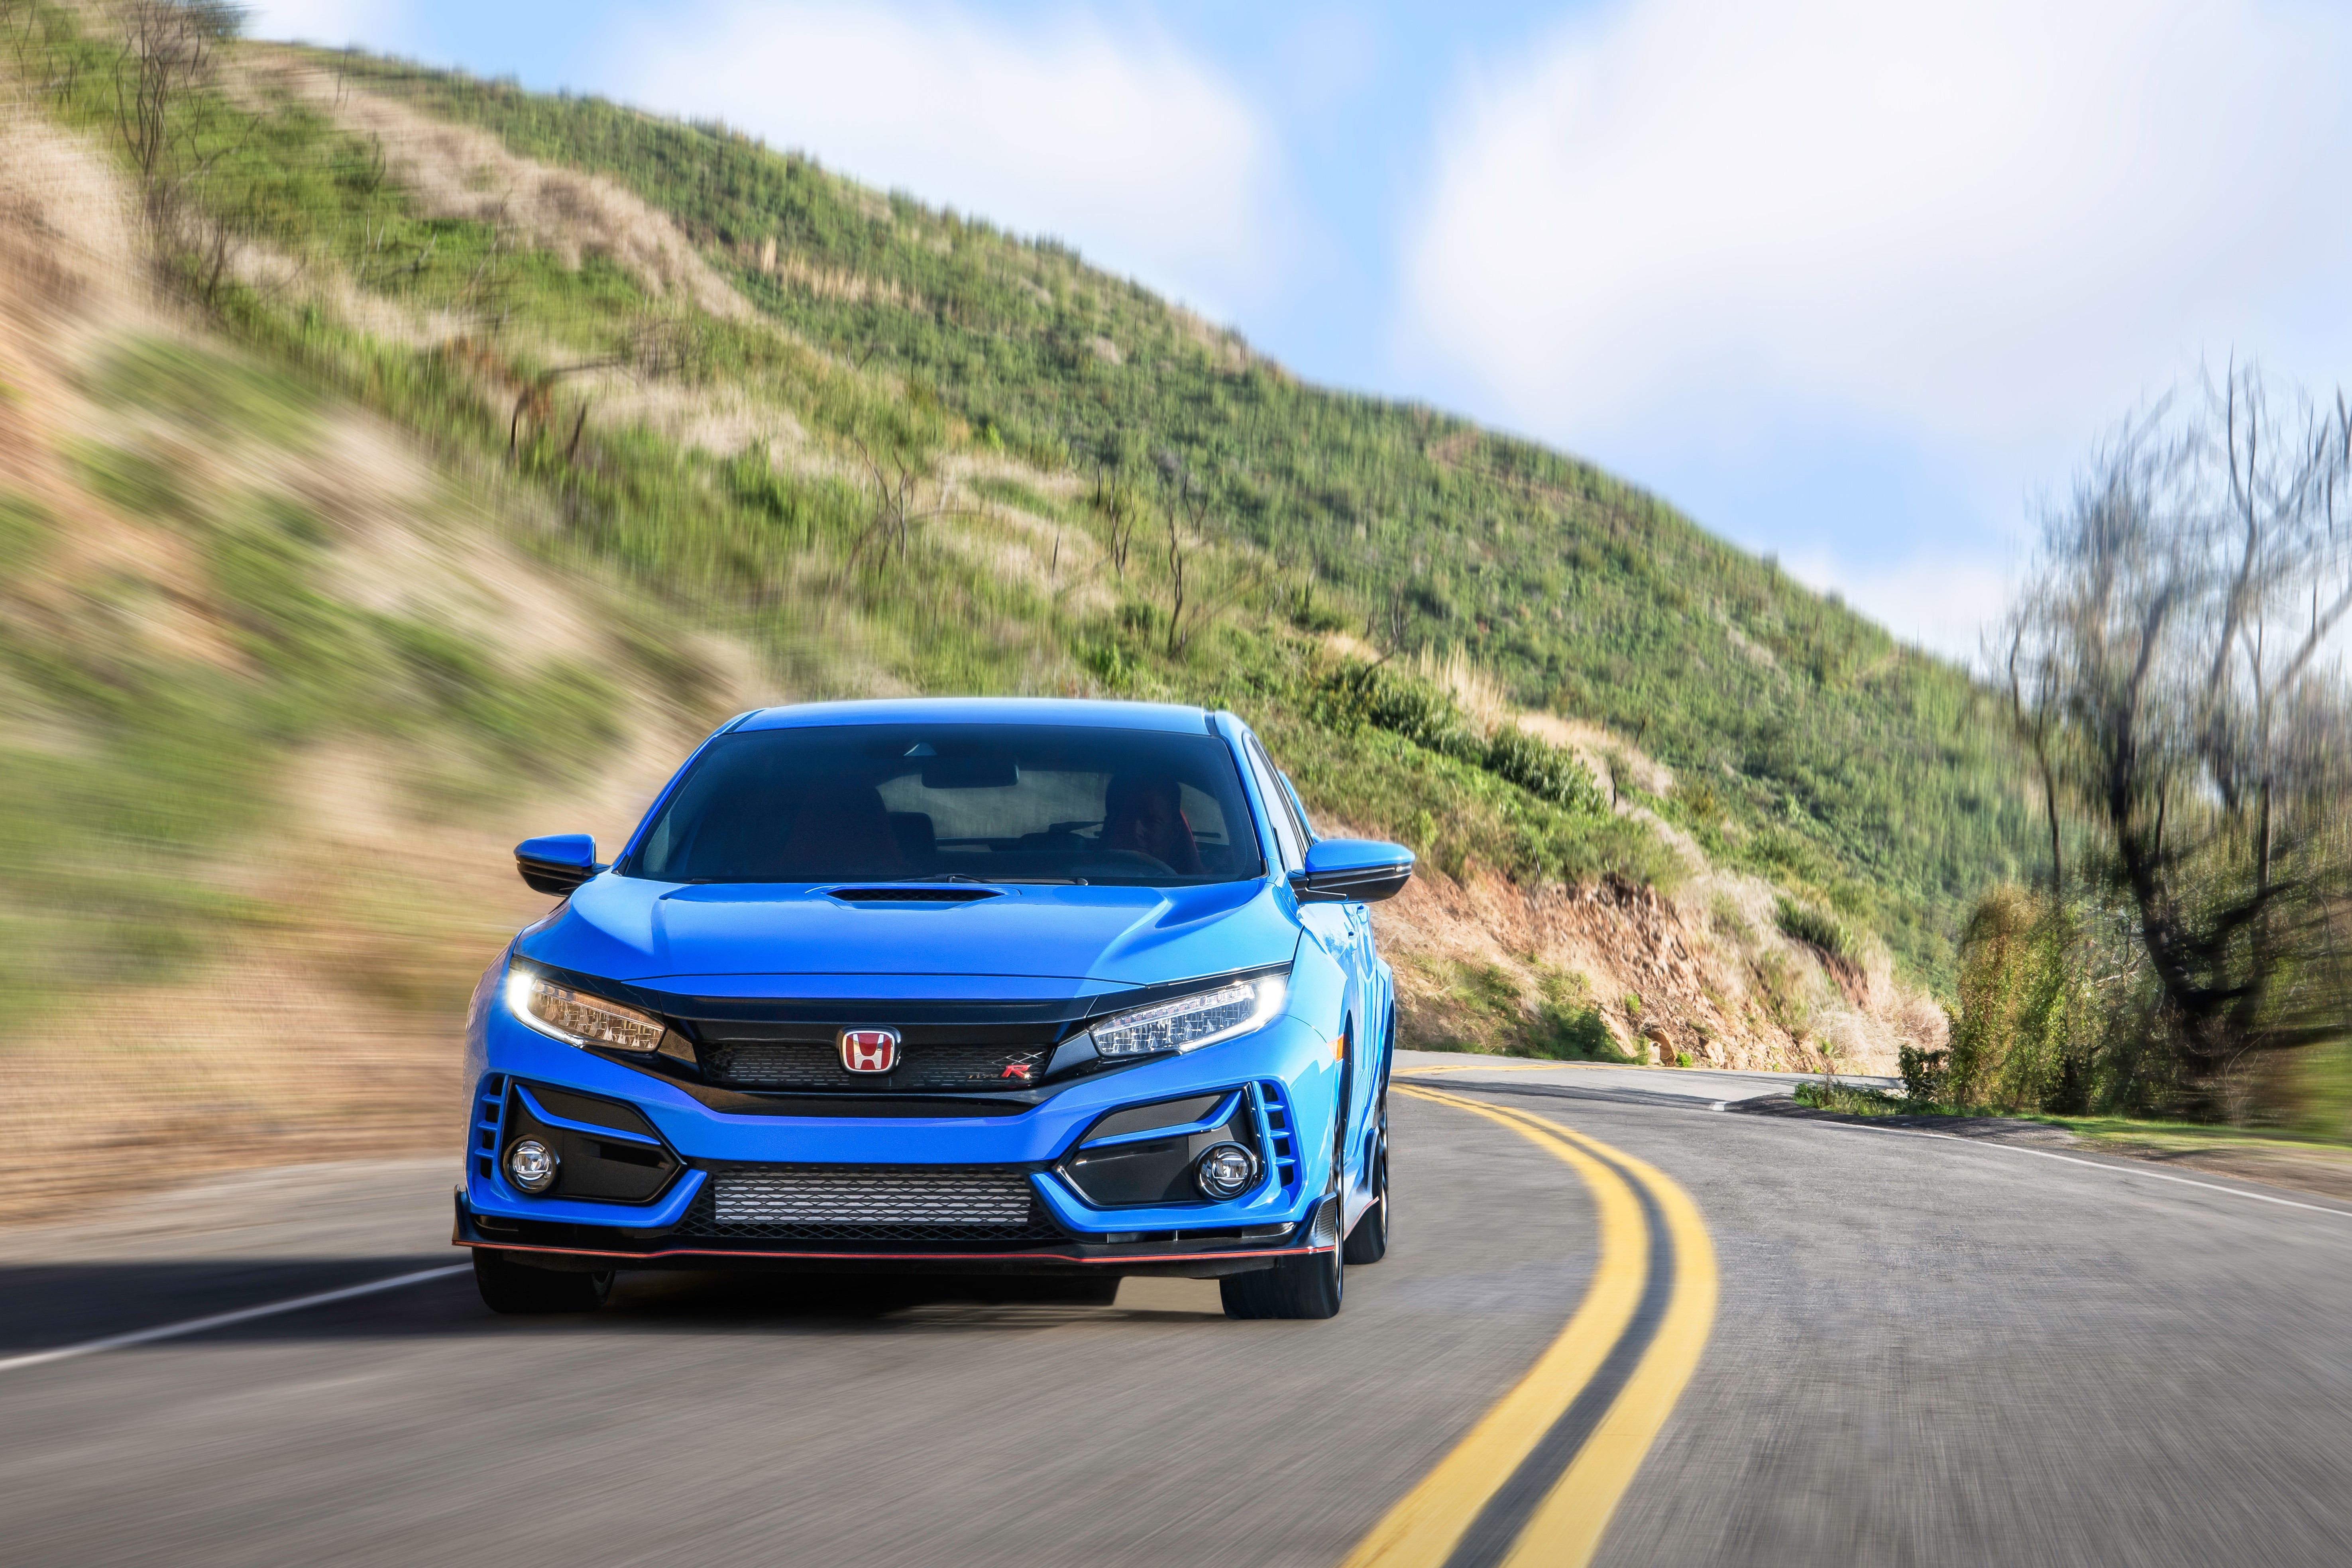 Electric Honda Civic Type-R will only be possible with solid-state battery  - ArenaEV